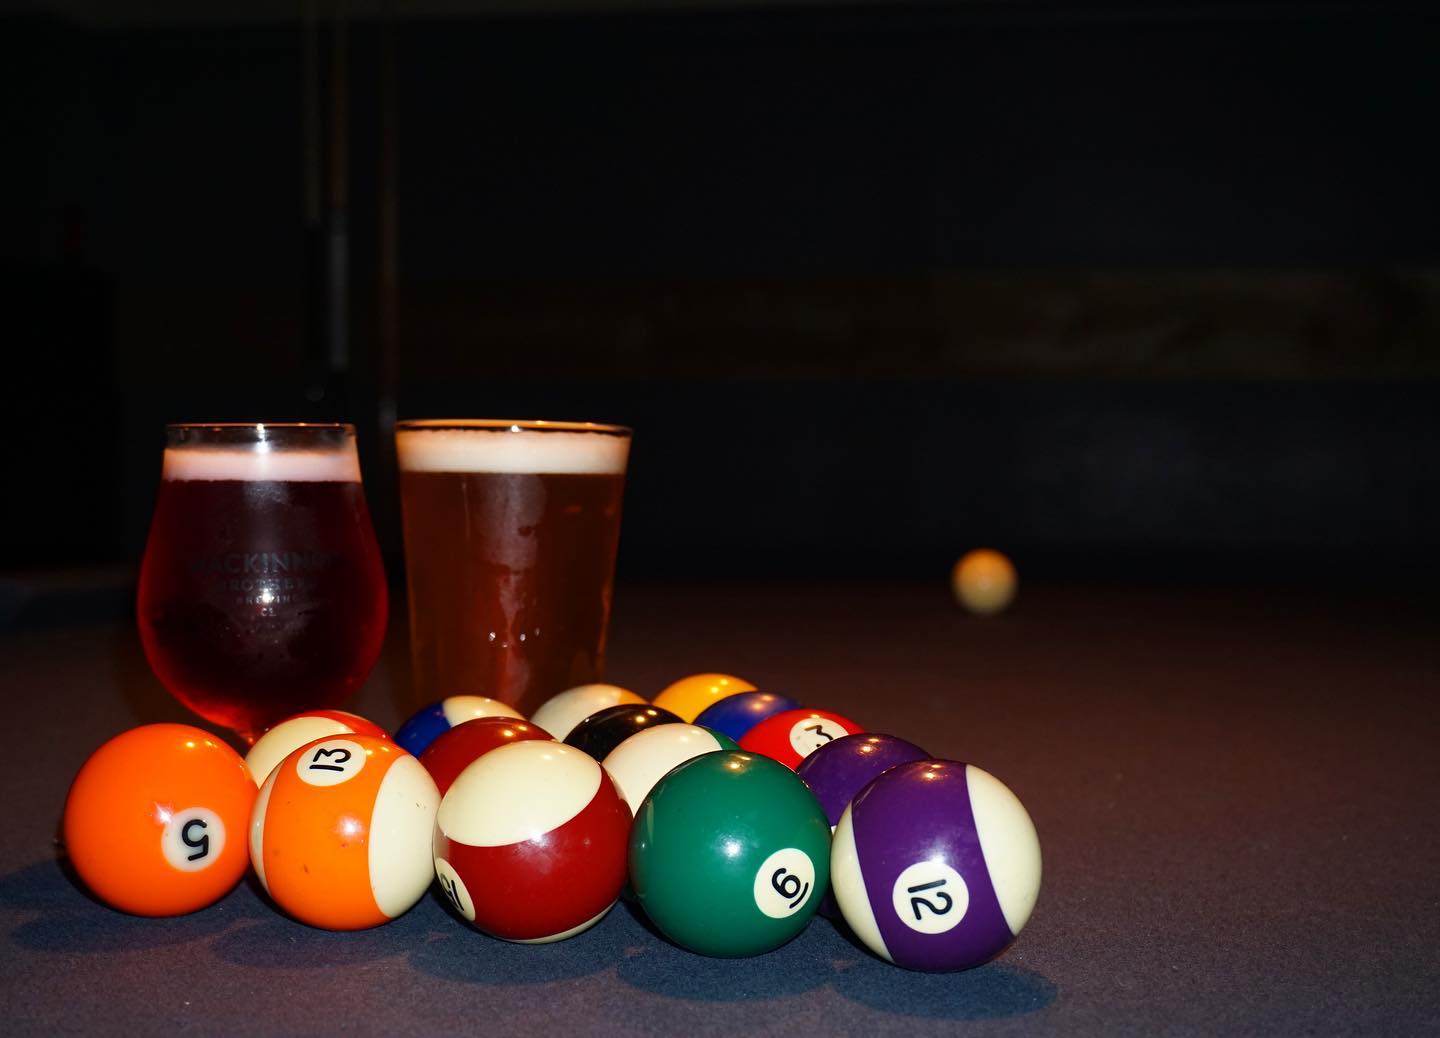 Dive into fun at The Grizzly Grill on Mondays! Enjoy half-price pool games and refreshing pints for just $10. Join us for a night of pool and pints in the heart of downtown Kingston